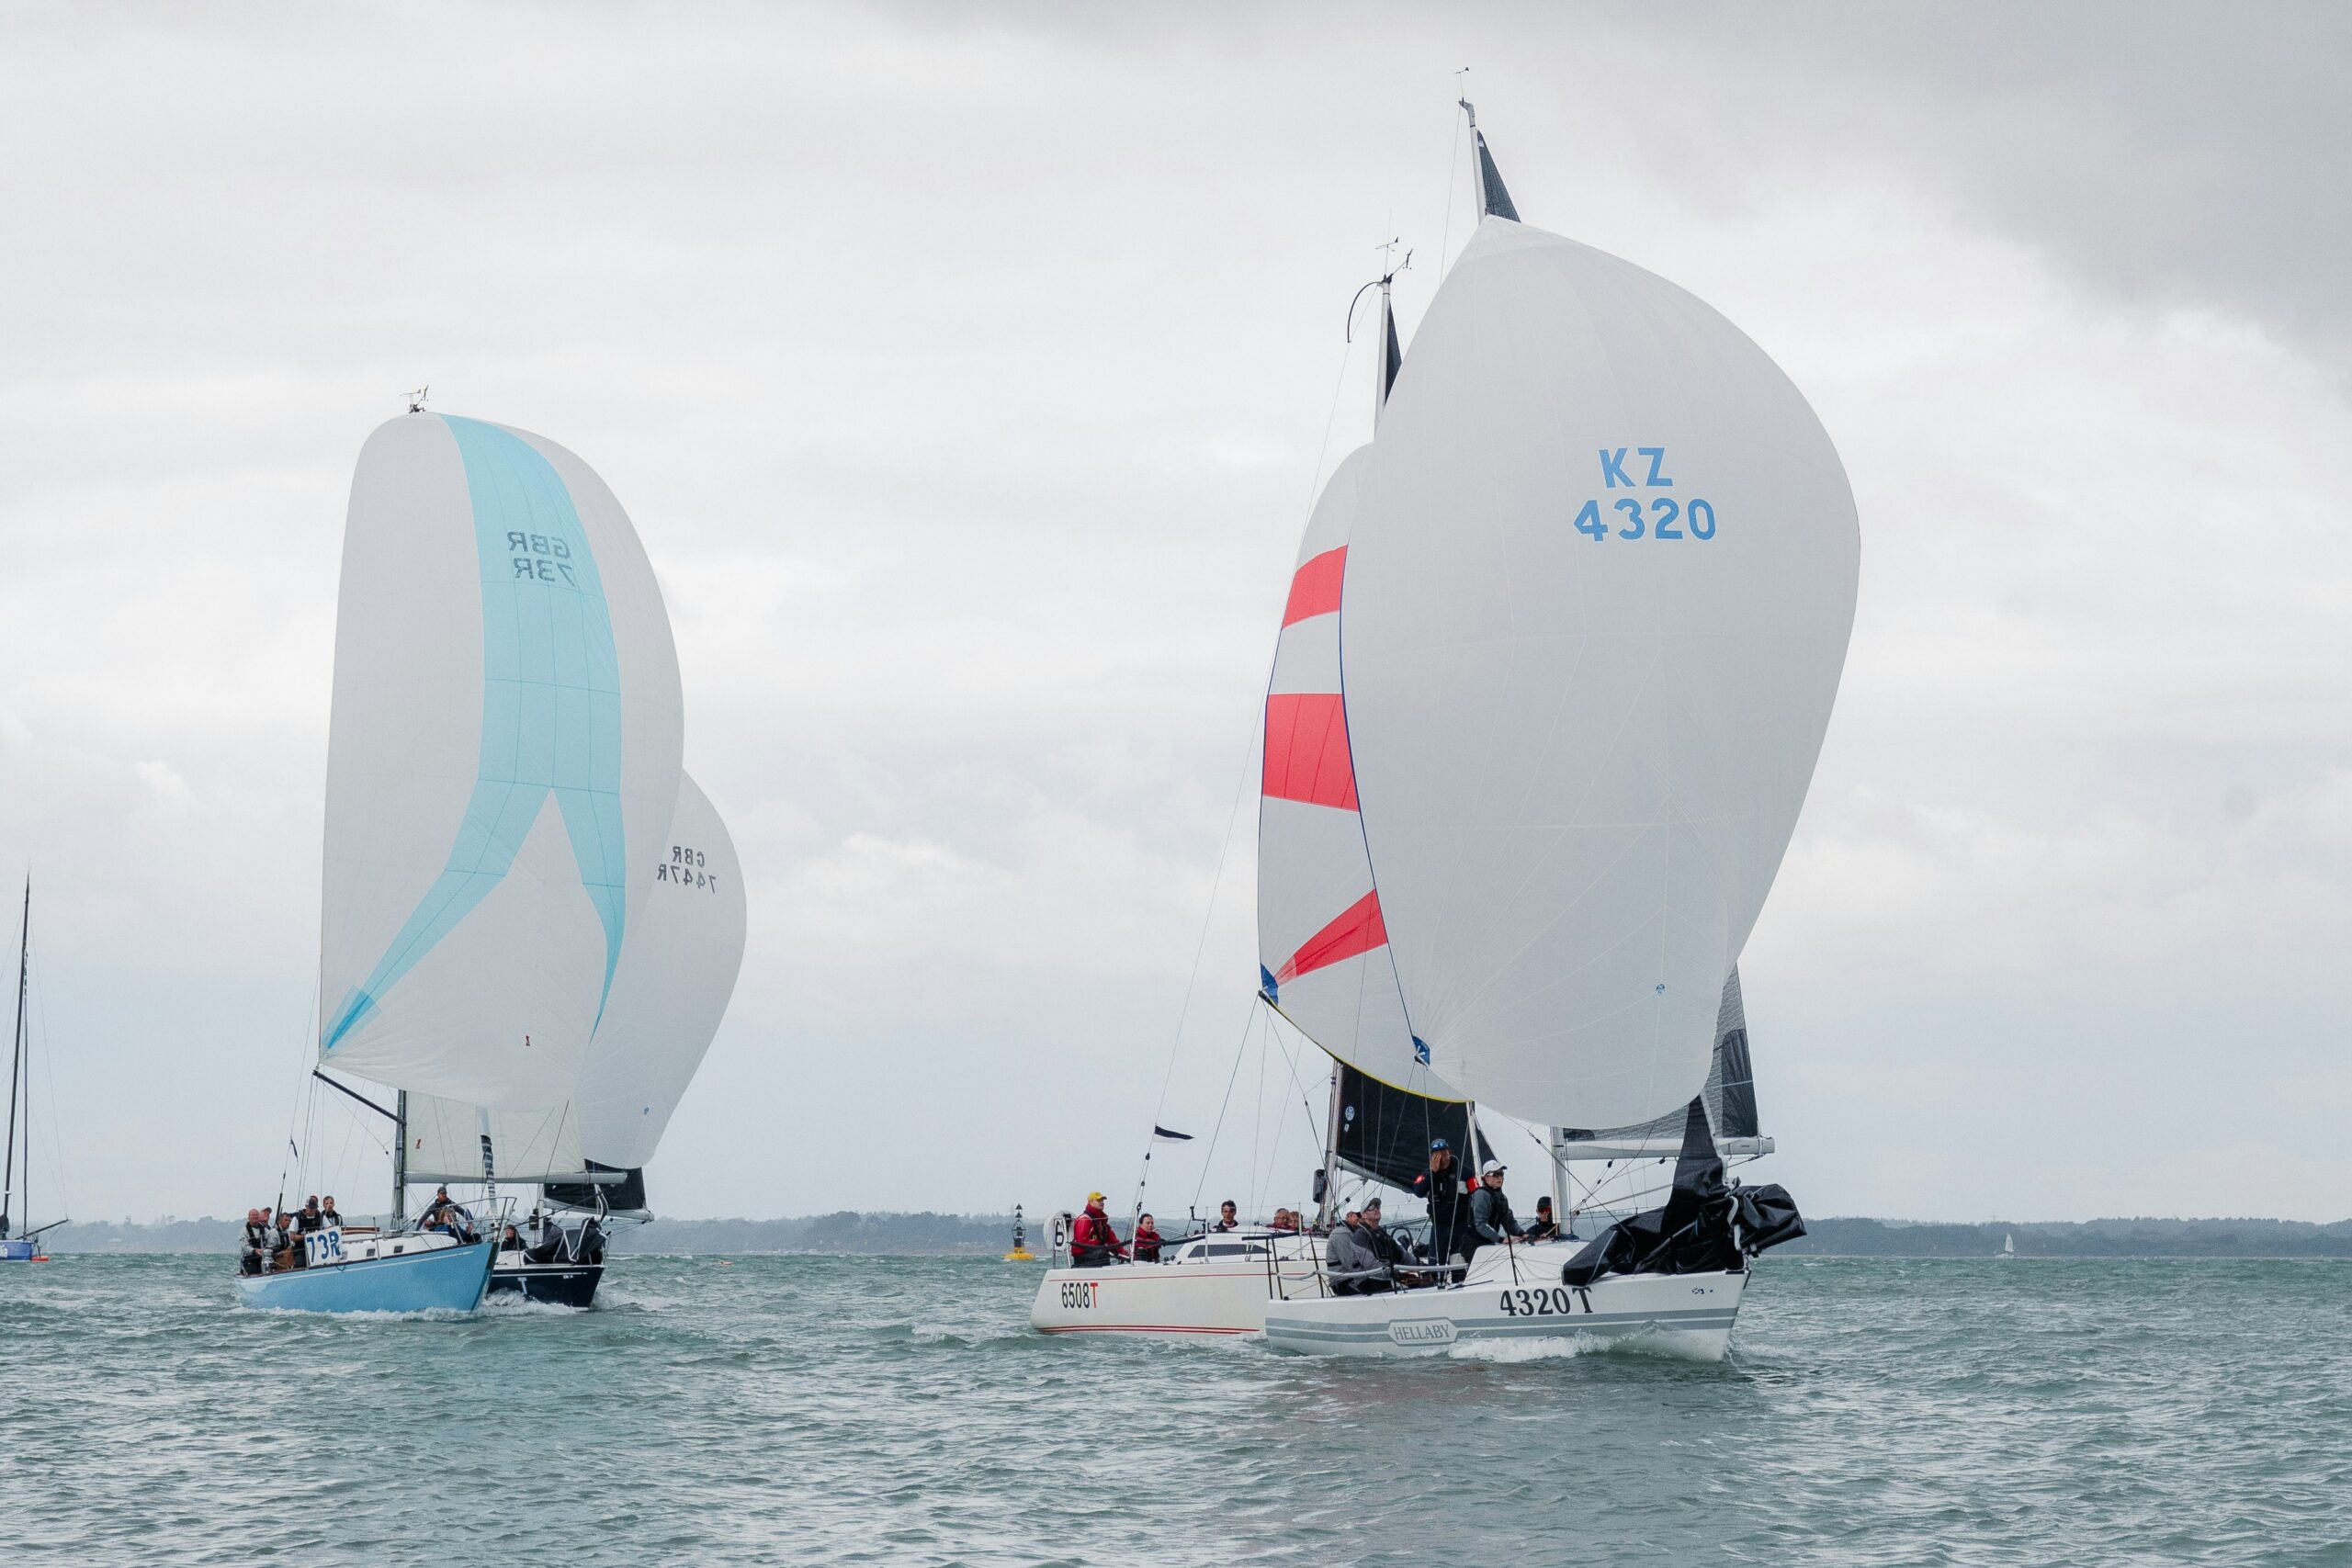 Boats on the water for Cowes Week